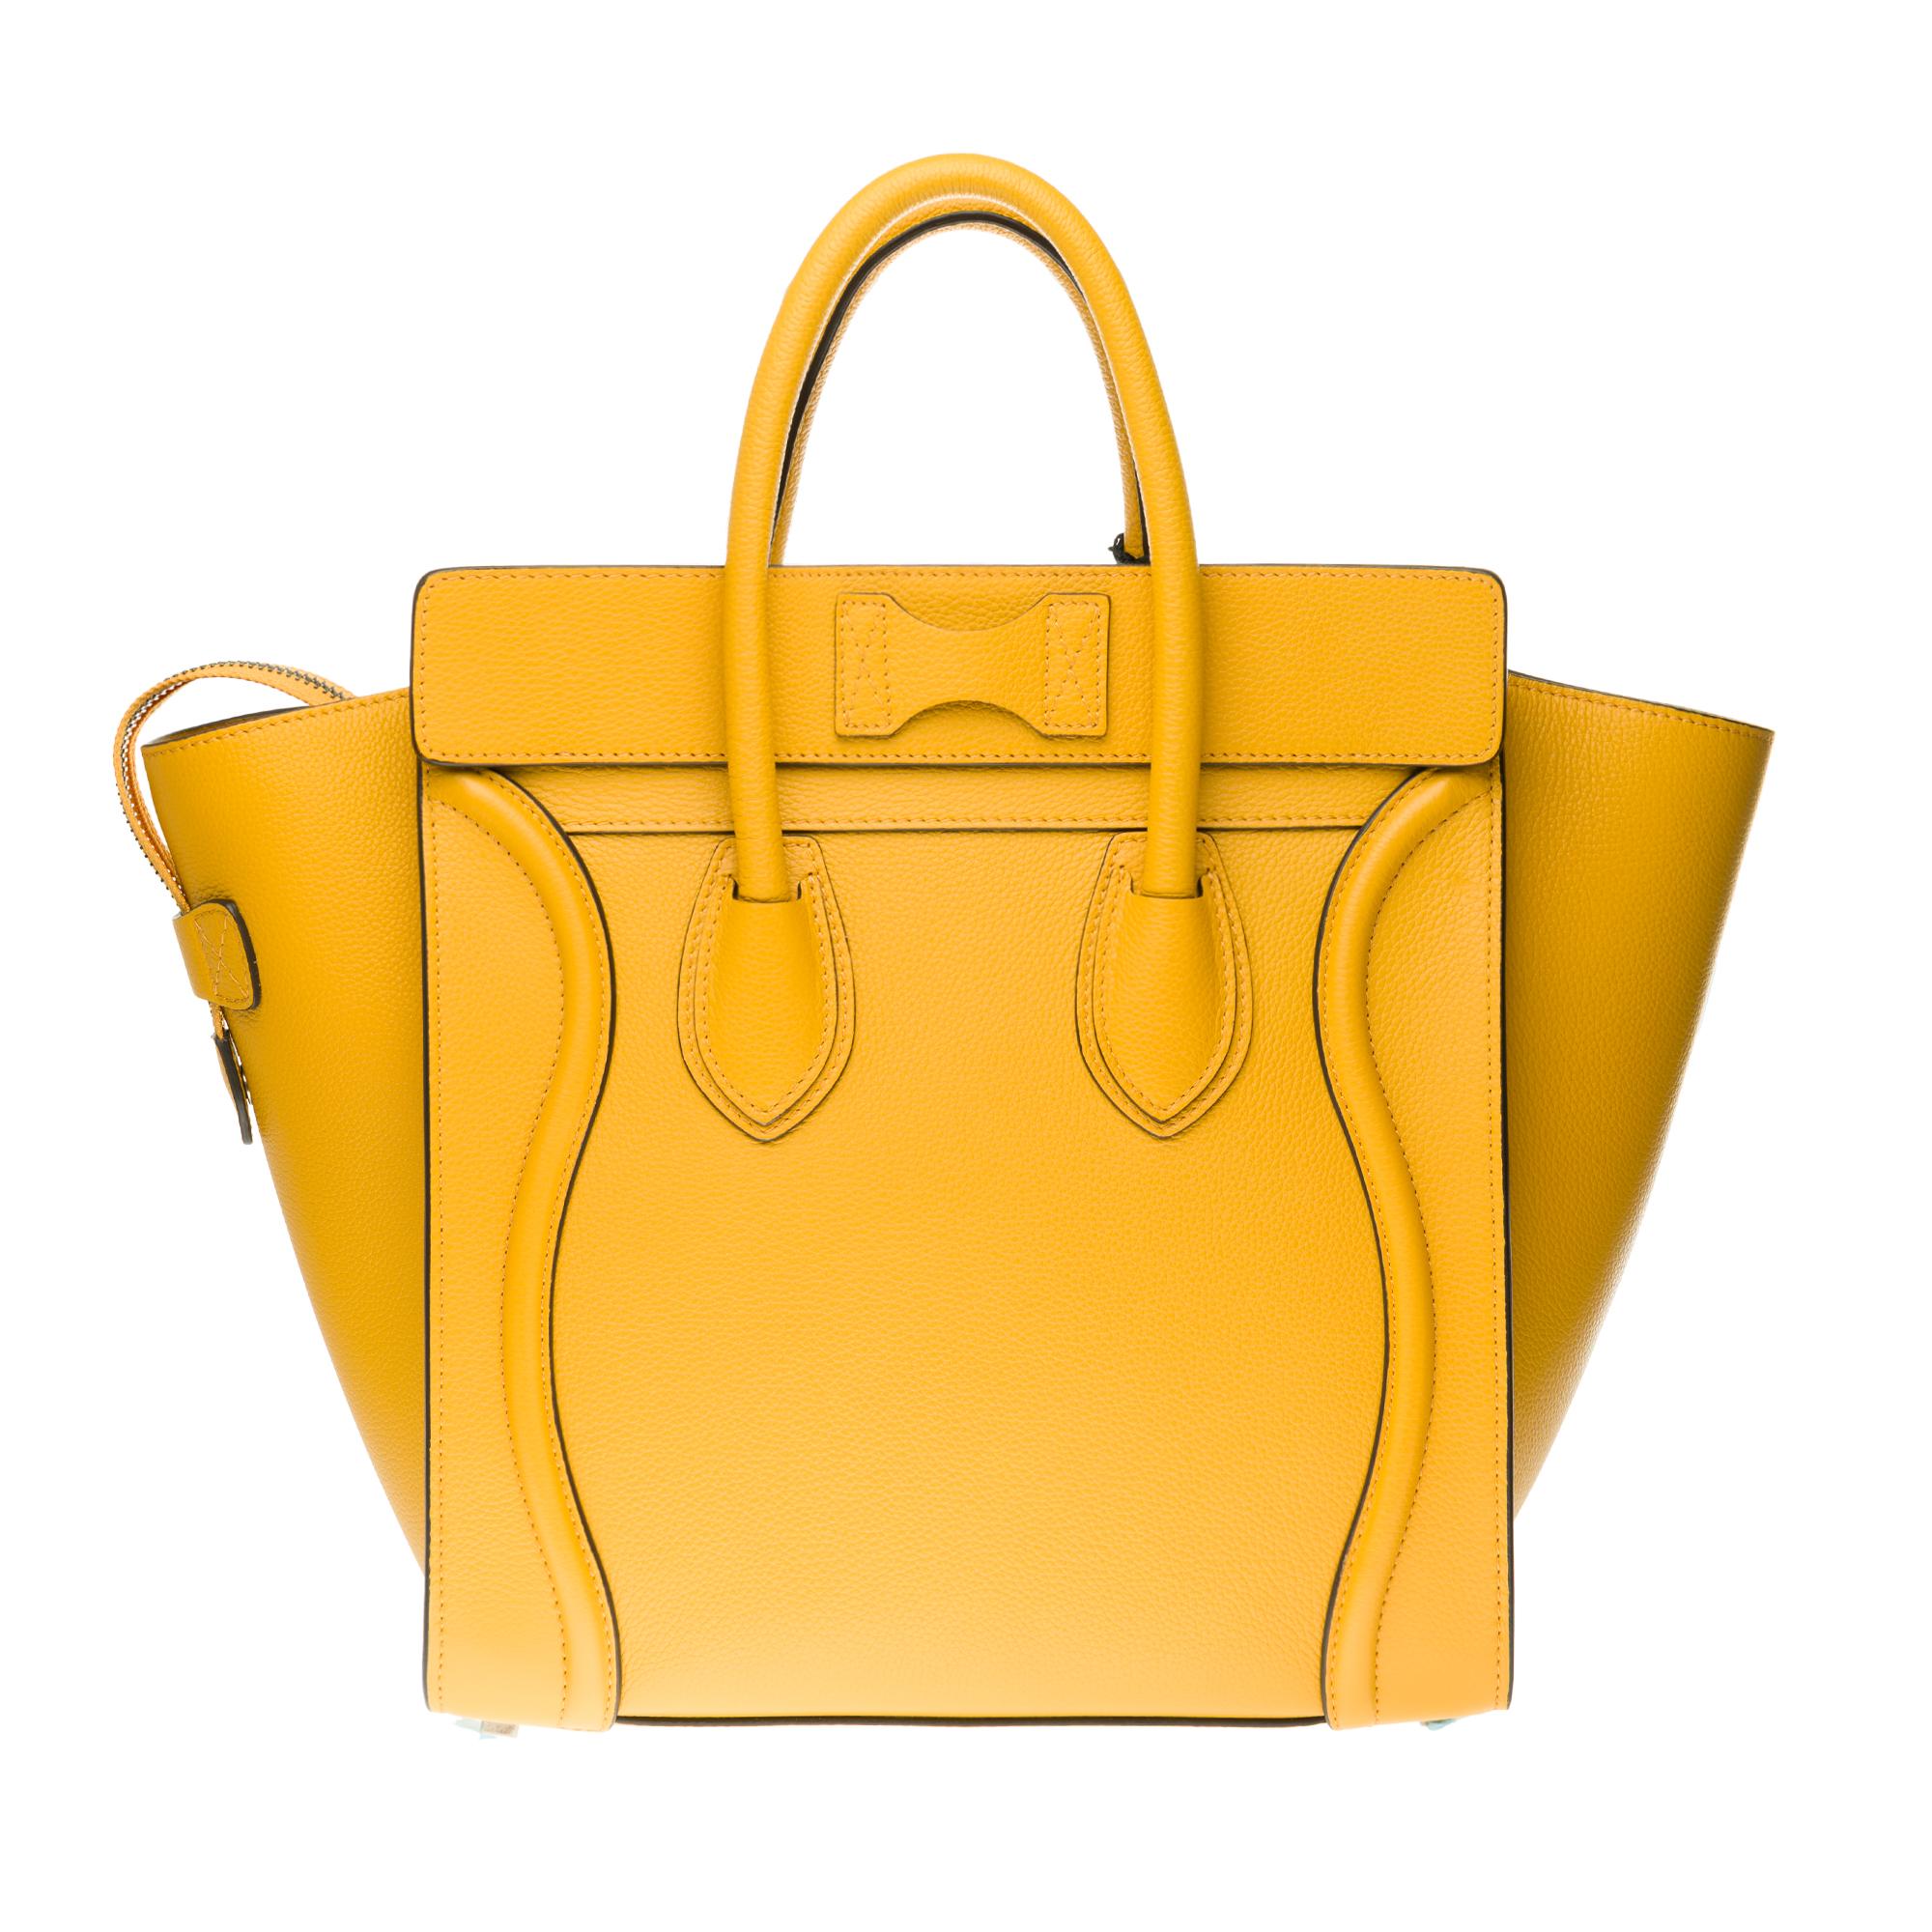 The iconic Céline LUGGAGE Mini handbag in Yellow Ochre calfskin with a handle, zipper and zipper pocket on the front.

31 X 31 X 18 CM (12 X 12 X 7 IN)
CALF
CALF LINING VELVET STYLE
SILVER FINISH
HAND HELD
ZIP FASTENER
ONE ZIP POCKET AND TWO